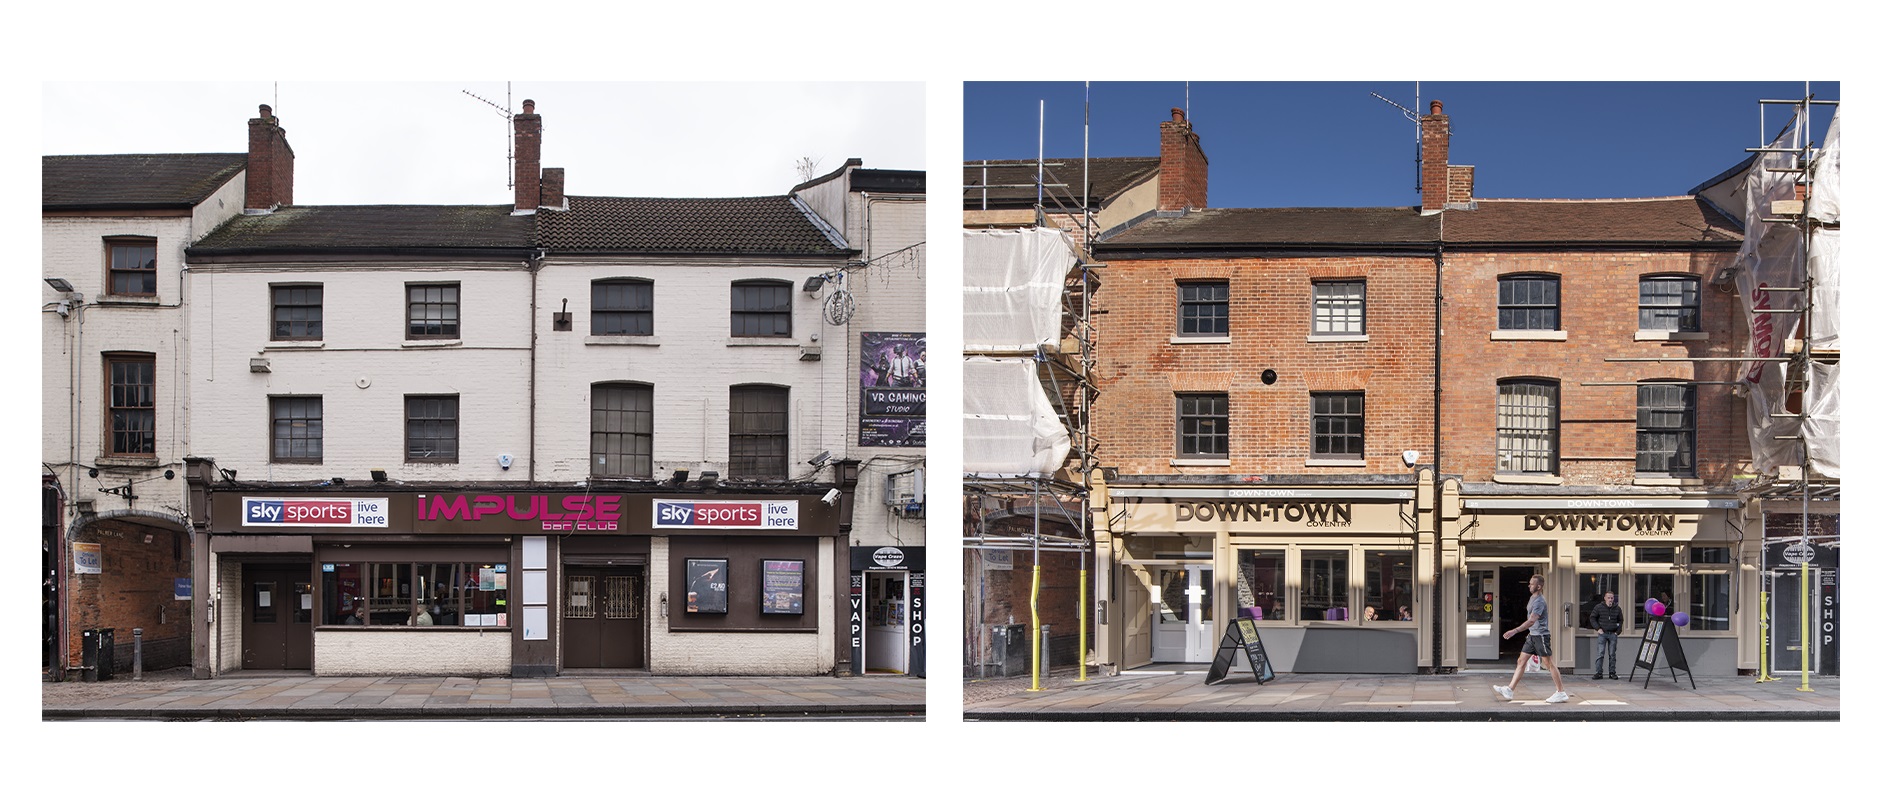 A high street building photographed before and after restoration. On the left, the building has white painted render and on the right, the render has been removed to reveal old brick.